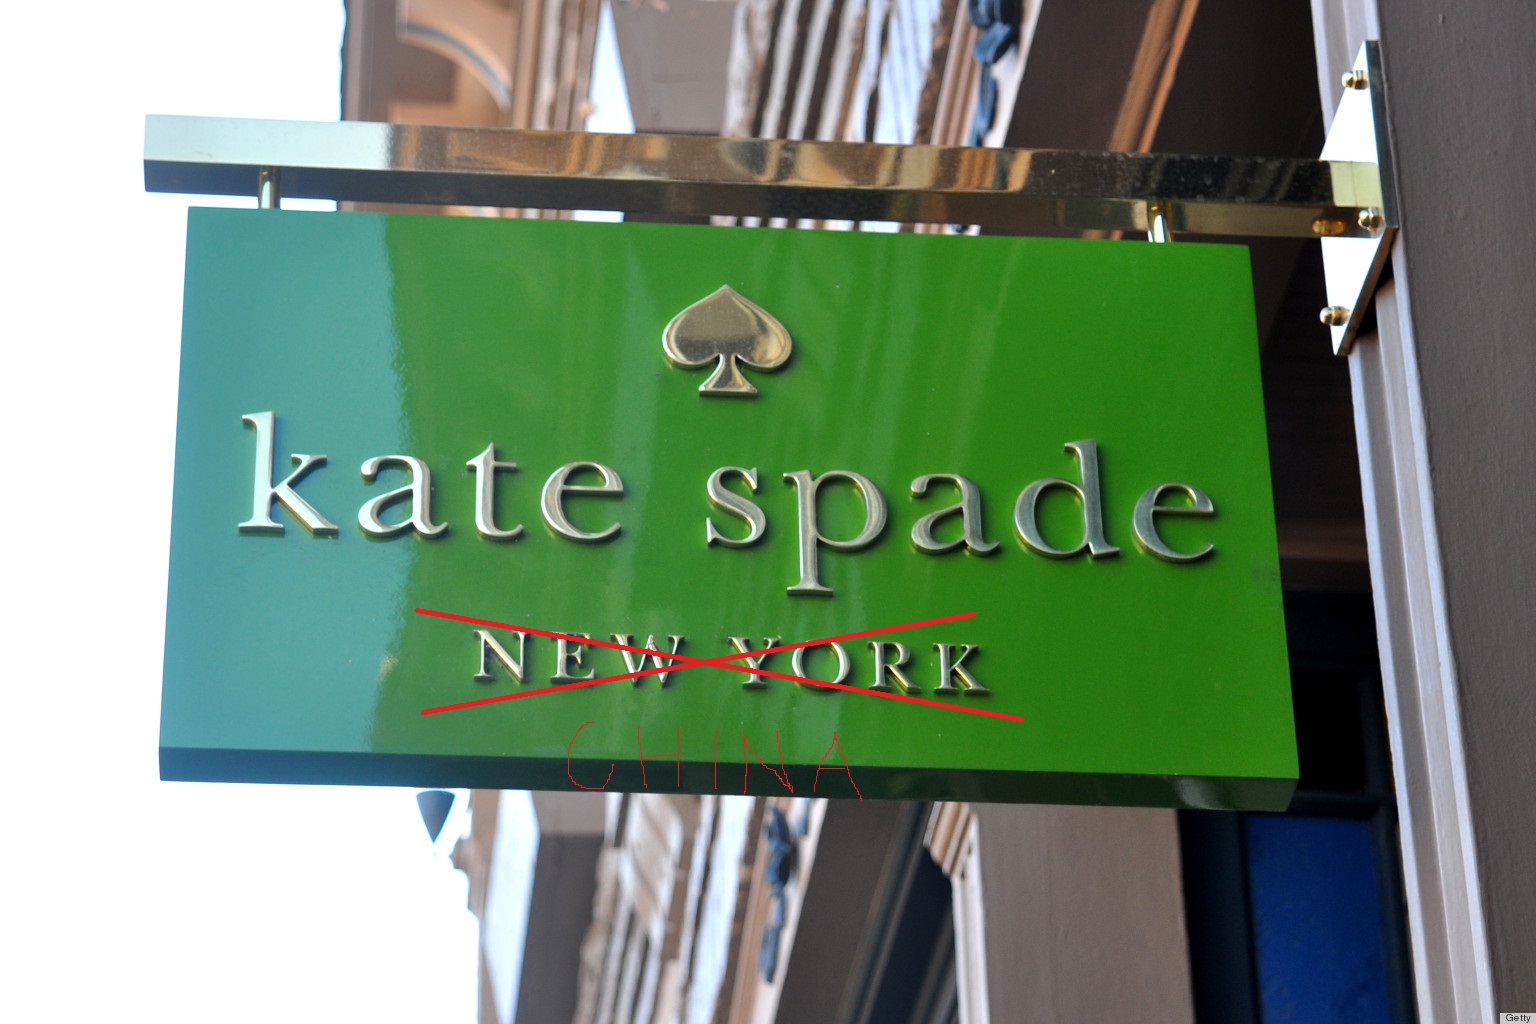 Kate Spade New York is made in China? | Fashionhedge